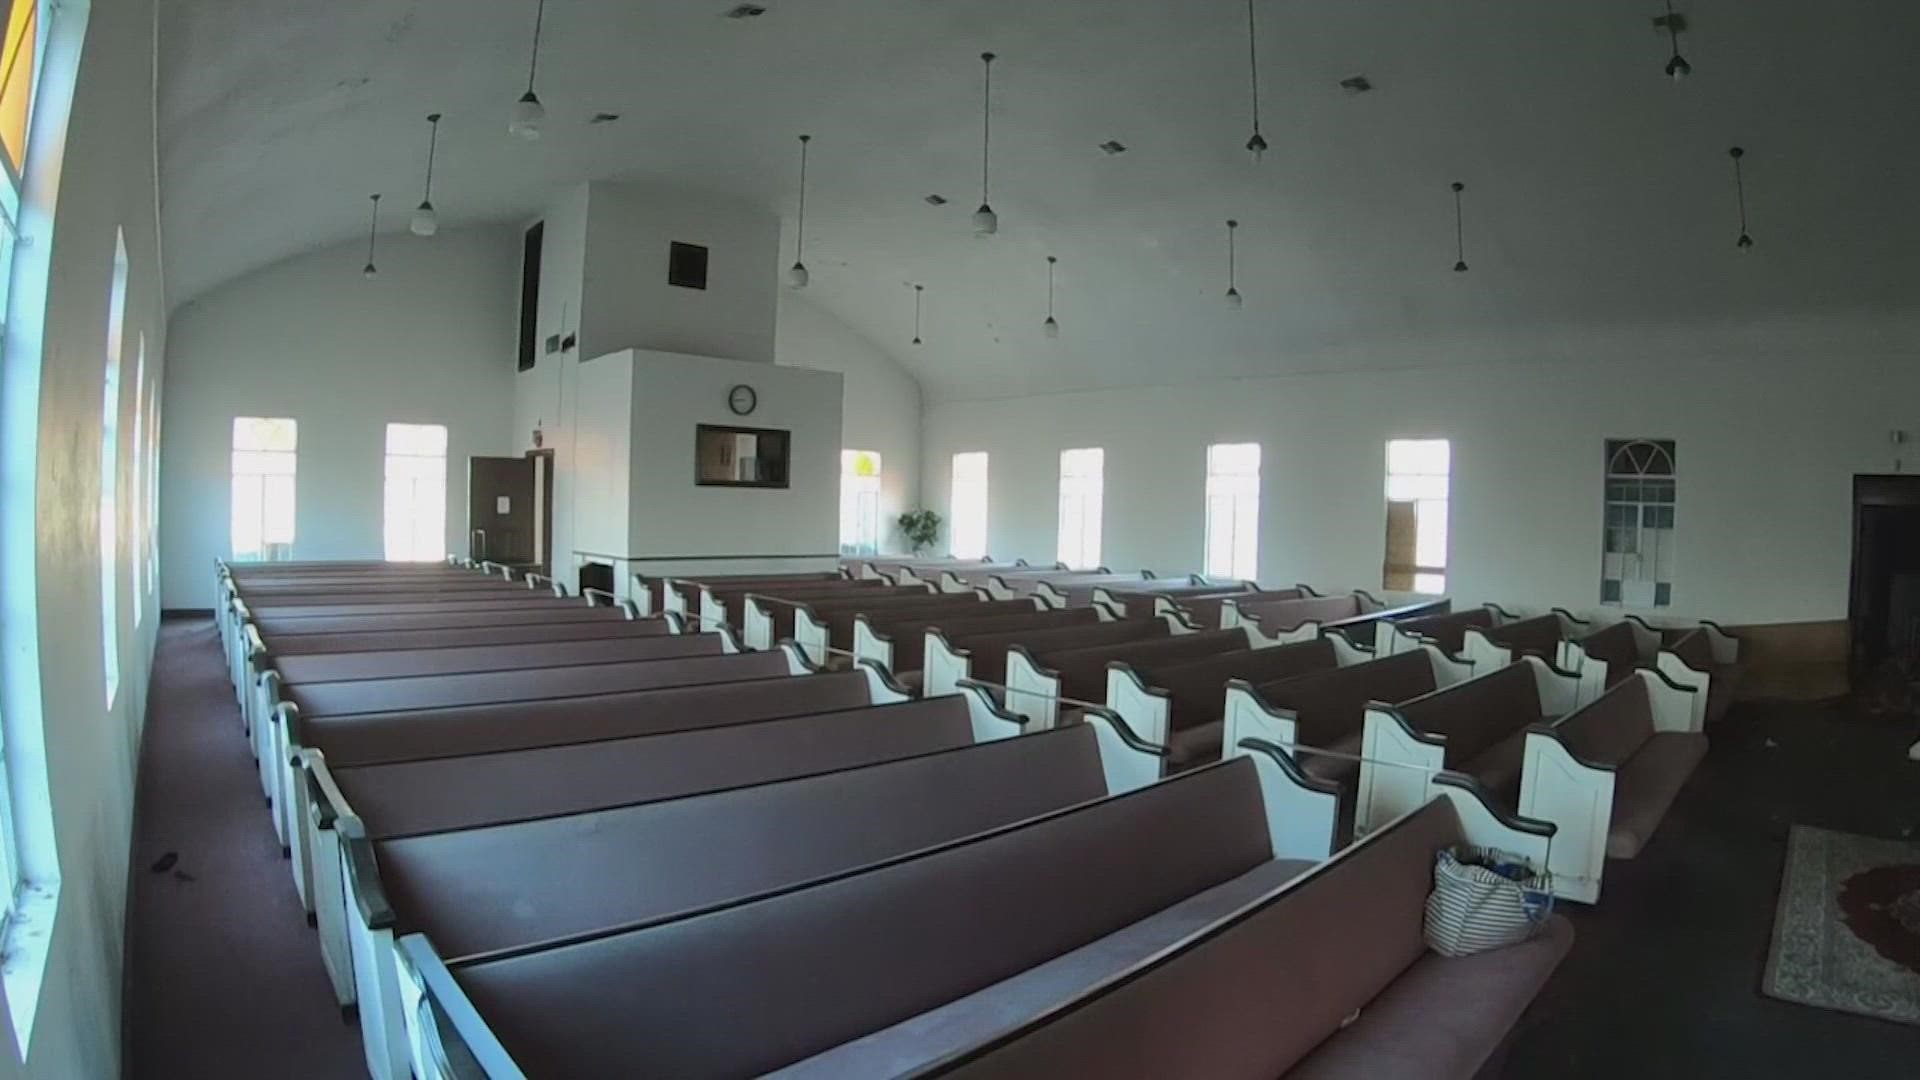 A Houston church known for its community outreach is struggling after being the target of thieves and vandals several times in recent months.